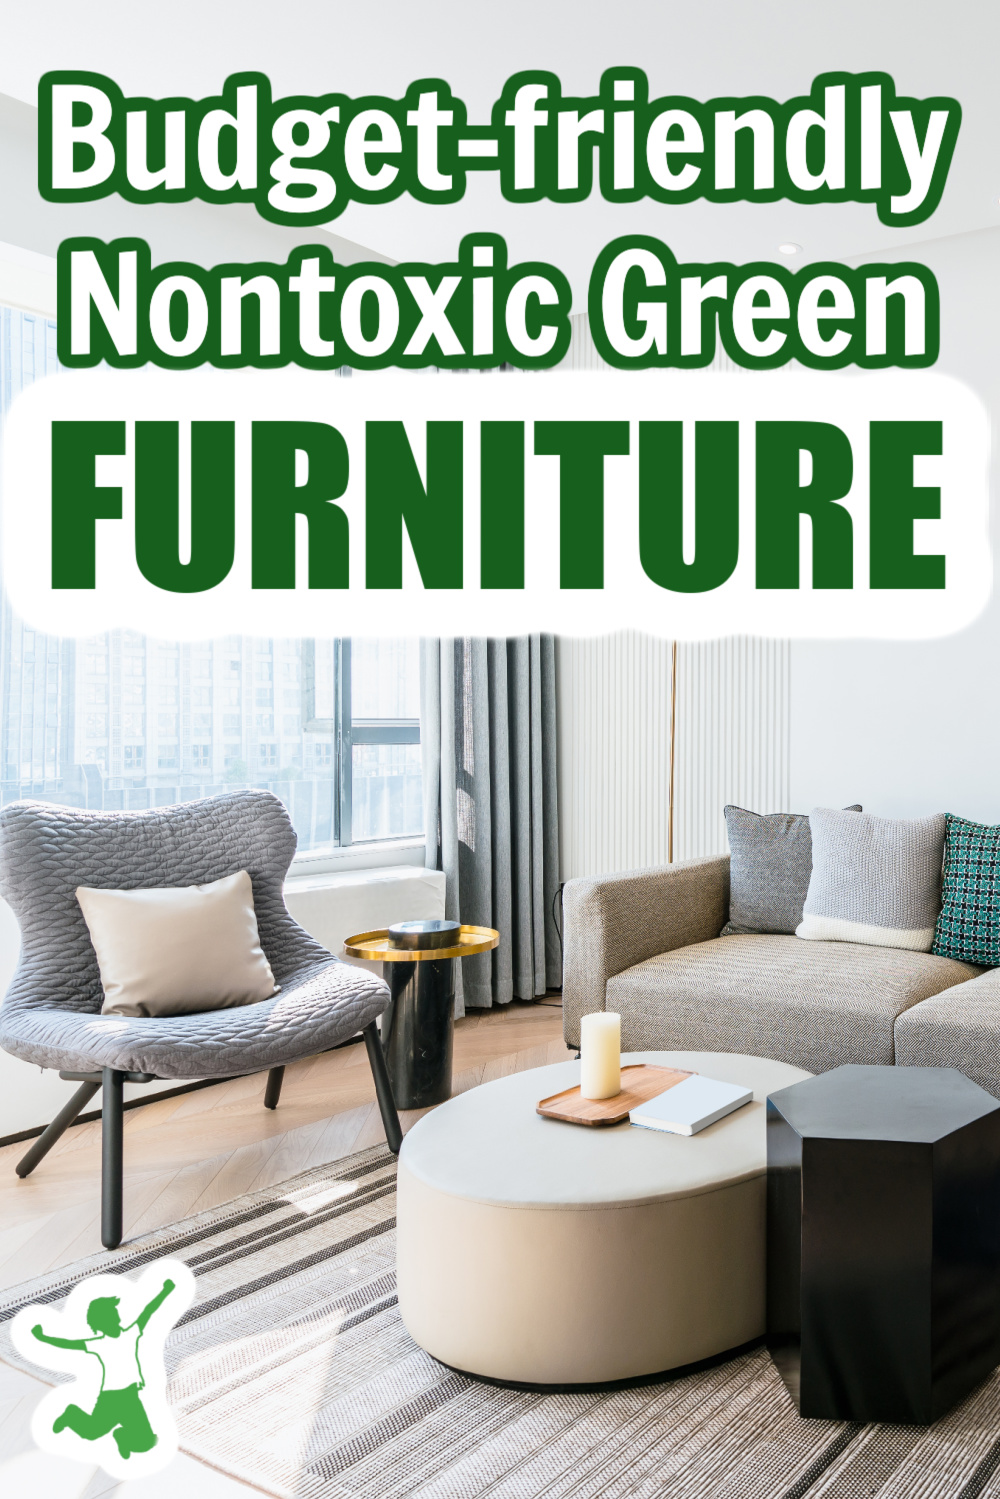 Affordable Non Toxic Couch Picks: The Hunt for Non-Toxic Furniture